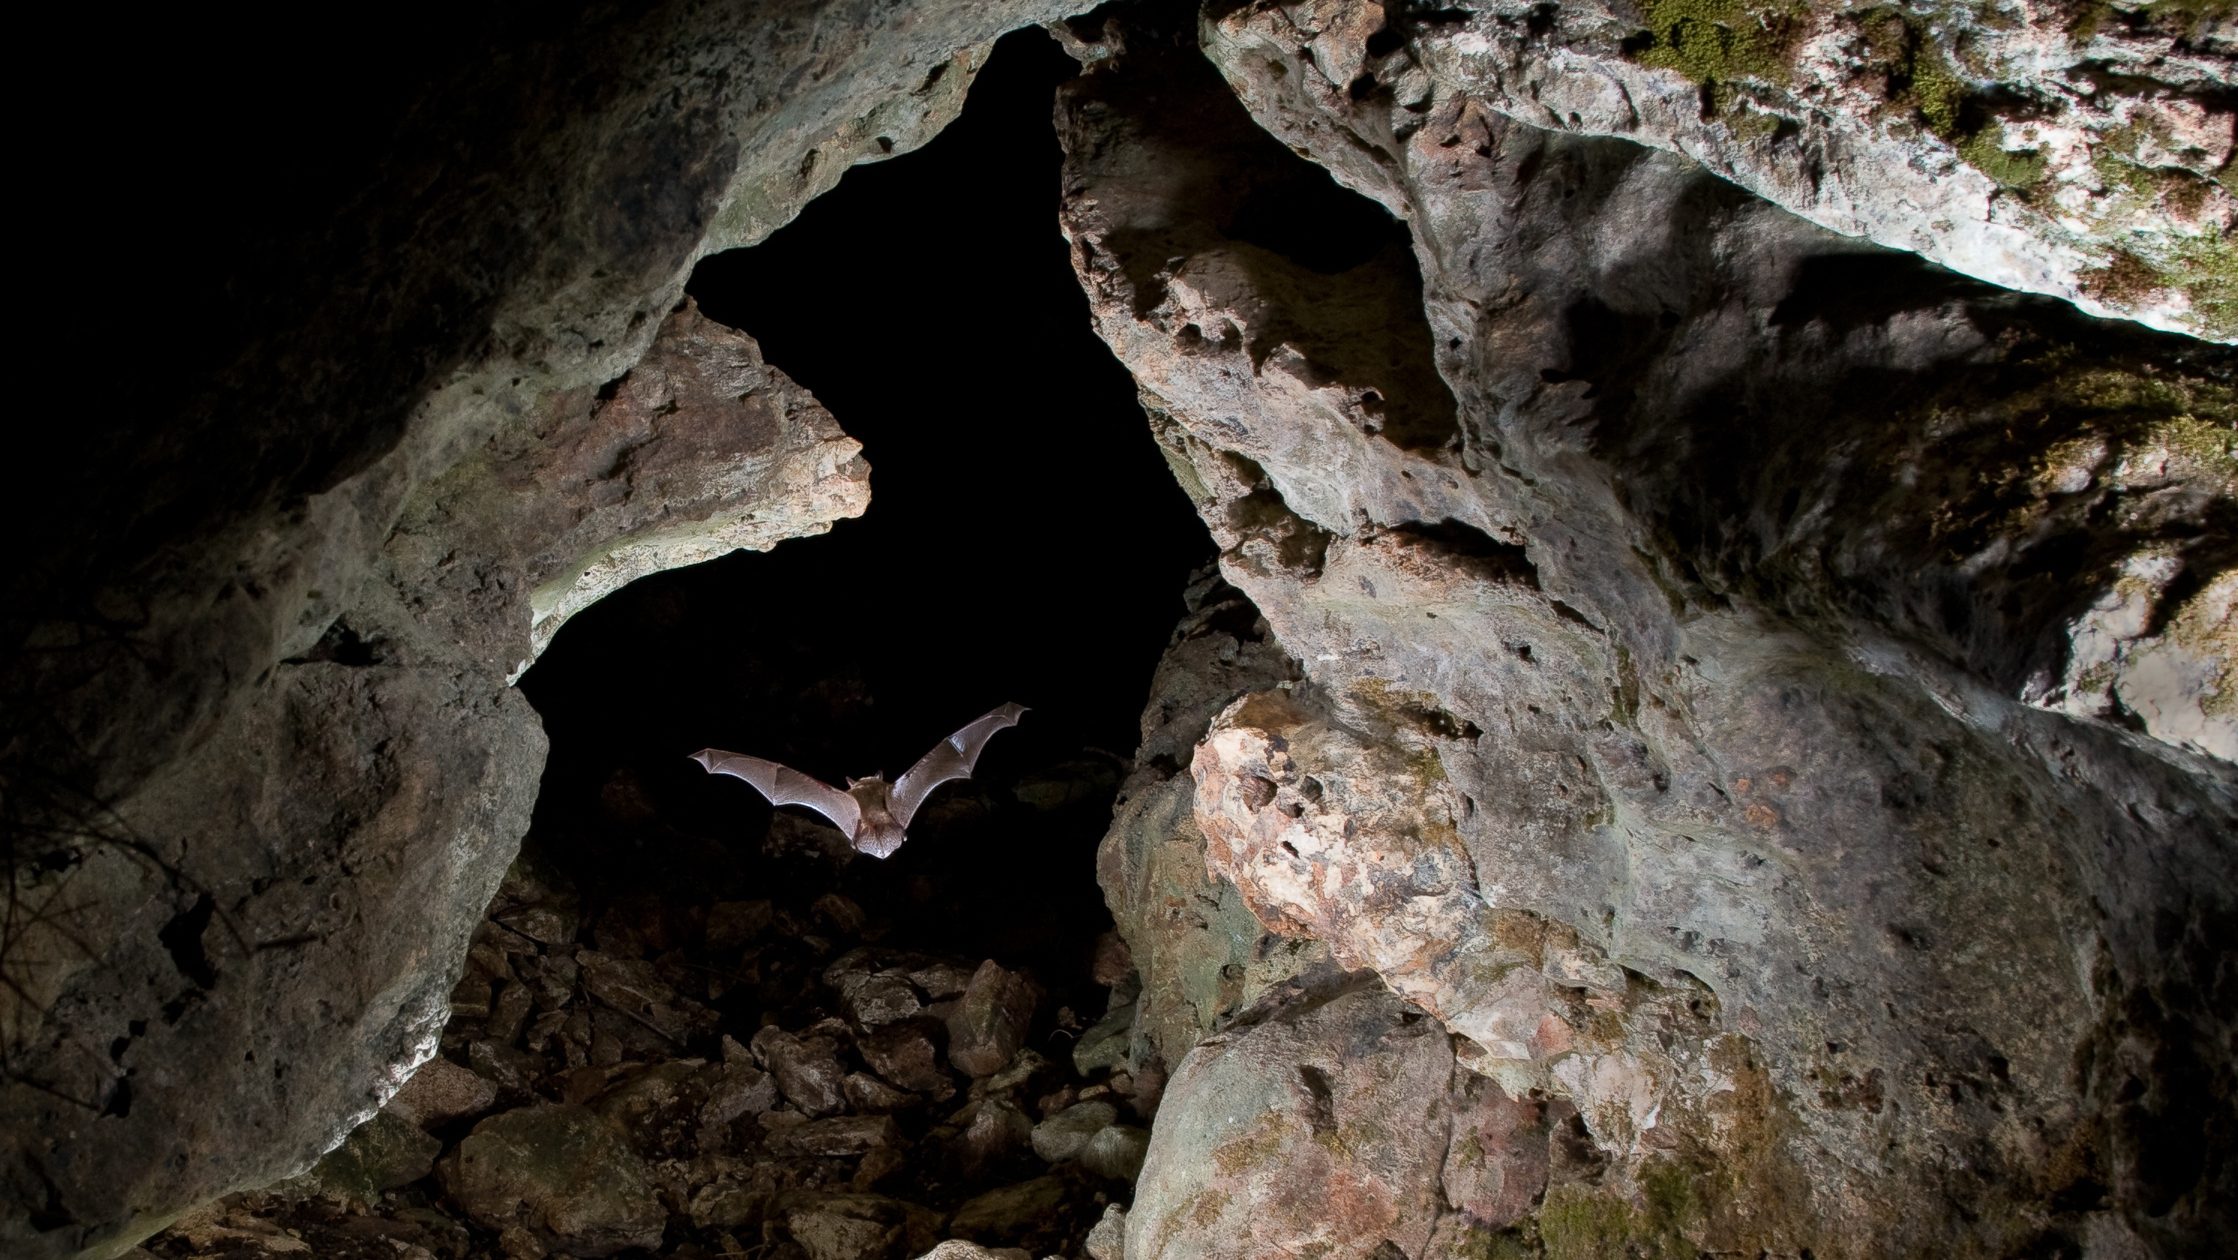 Eastern pipistrelle flying in a cave